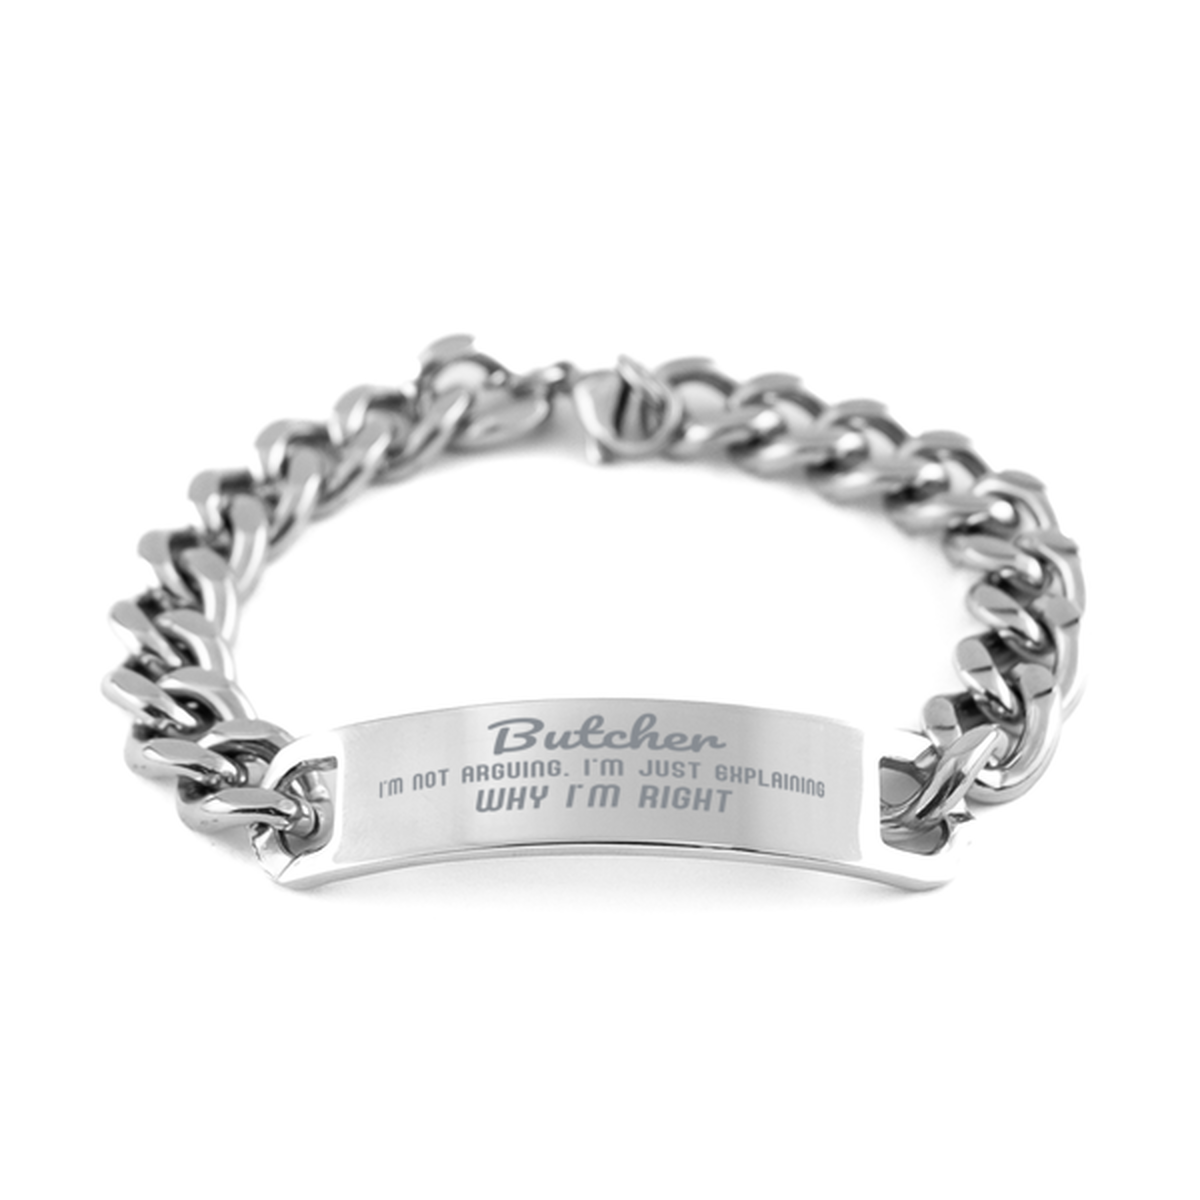 Butcher I'm not Arguing. I'm Just Explaining Why I'm RIGHT Cuban Chain Stainless Steel Bracelet, Graduation Birthday Christmas Butcher Gifts For Butcher Funny Saying Quote Present for Men Women Coworker